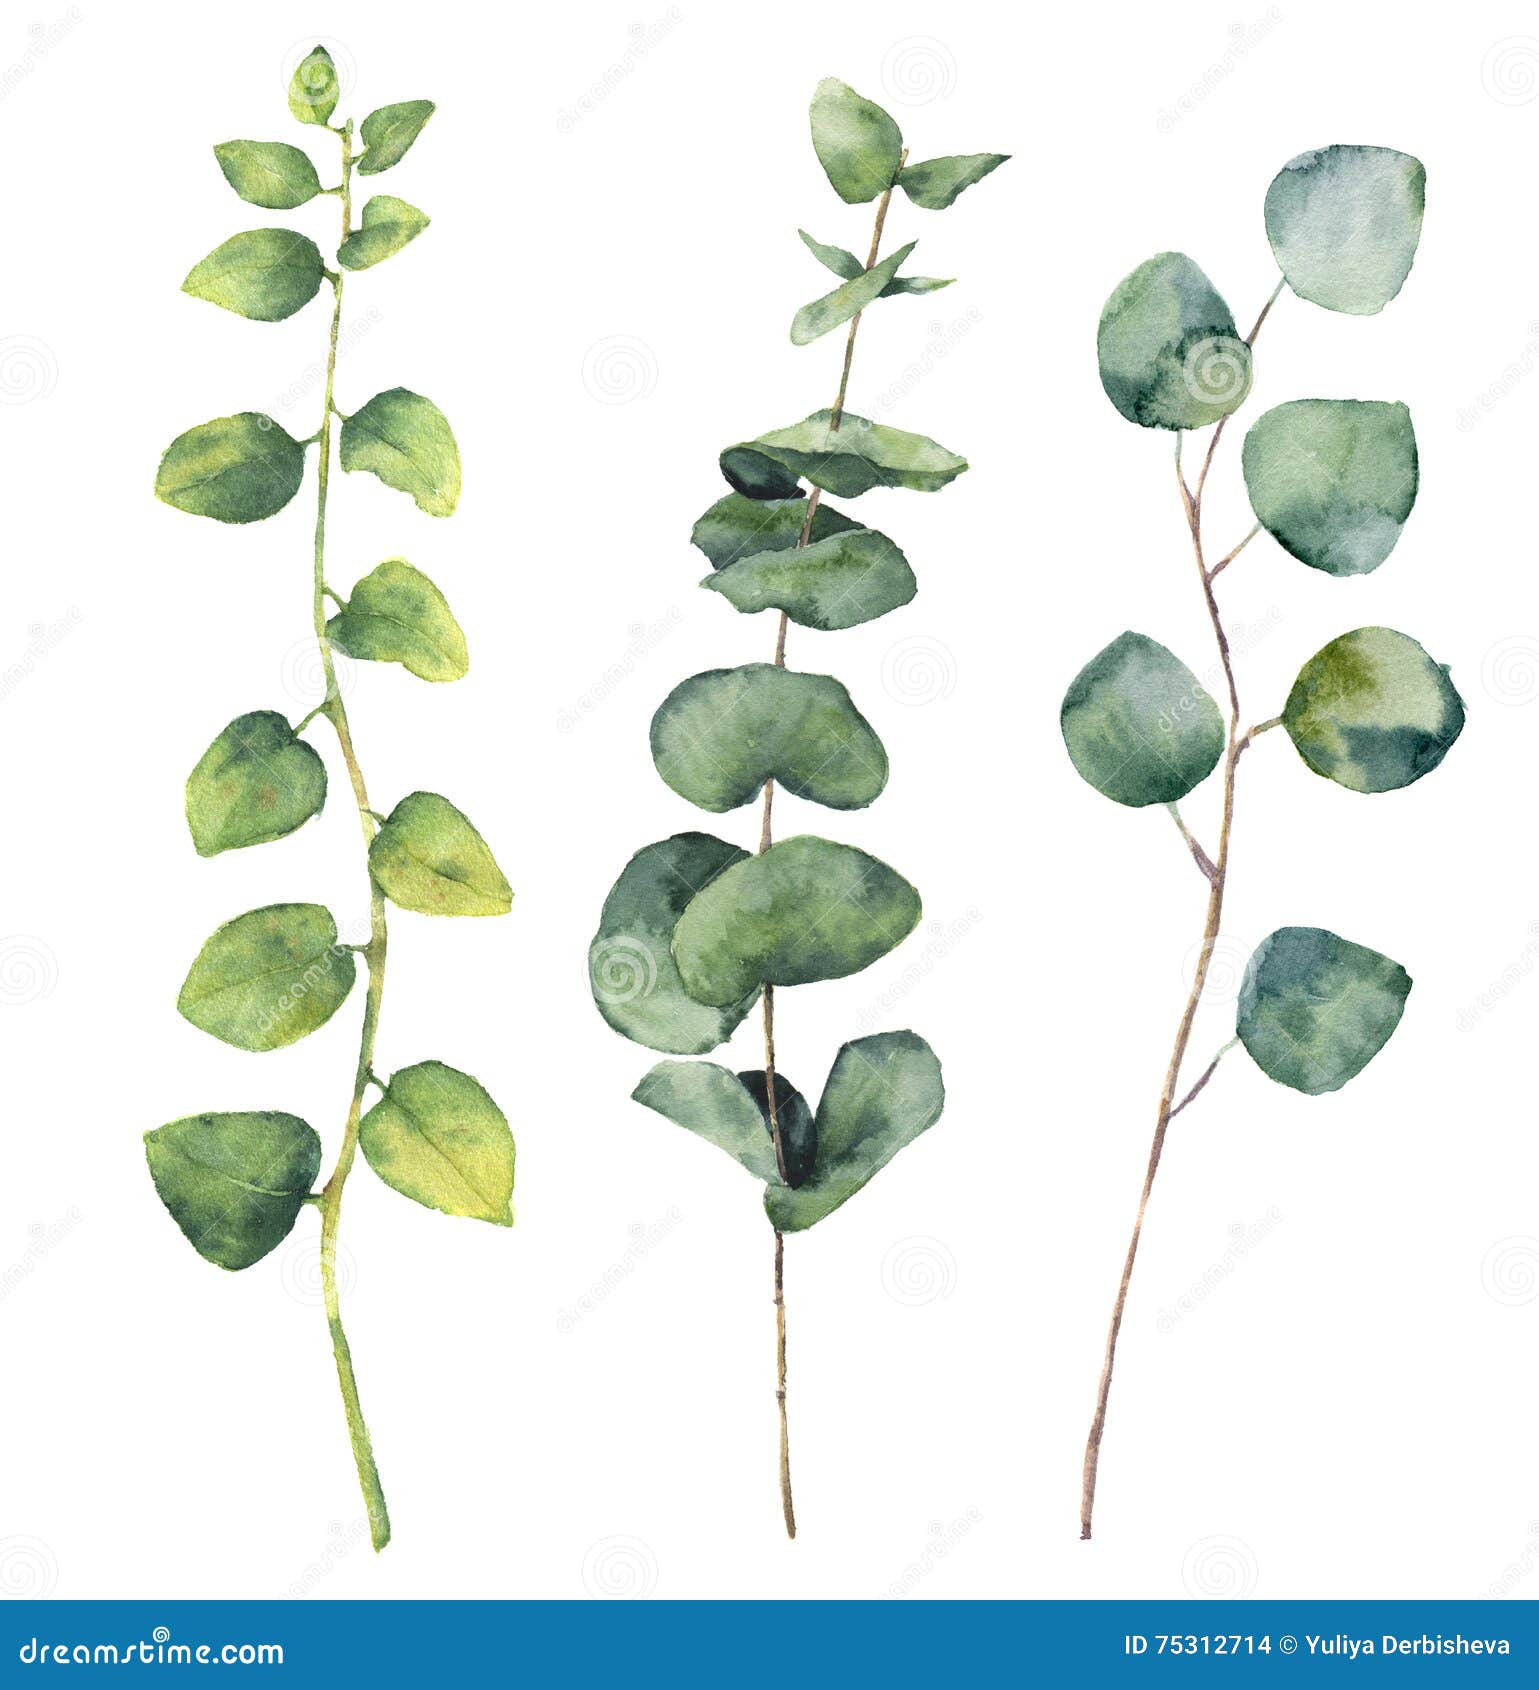 watercolor eucalyptus round leaves and twig branches.